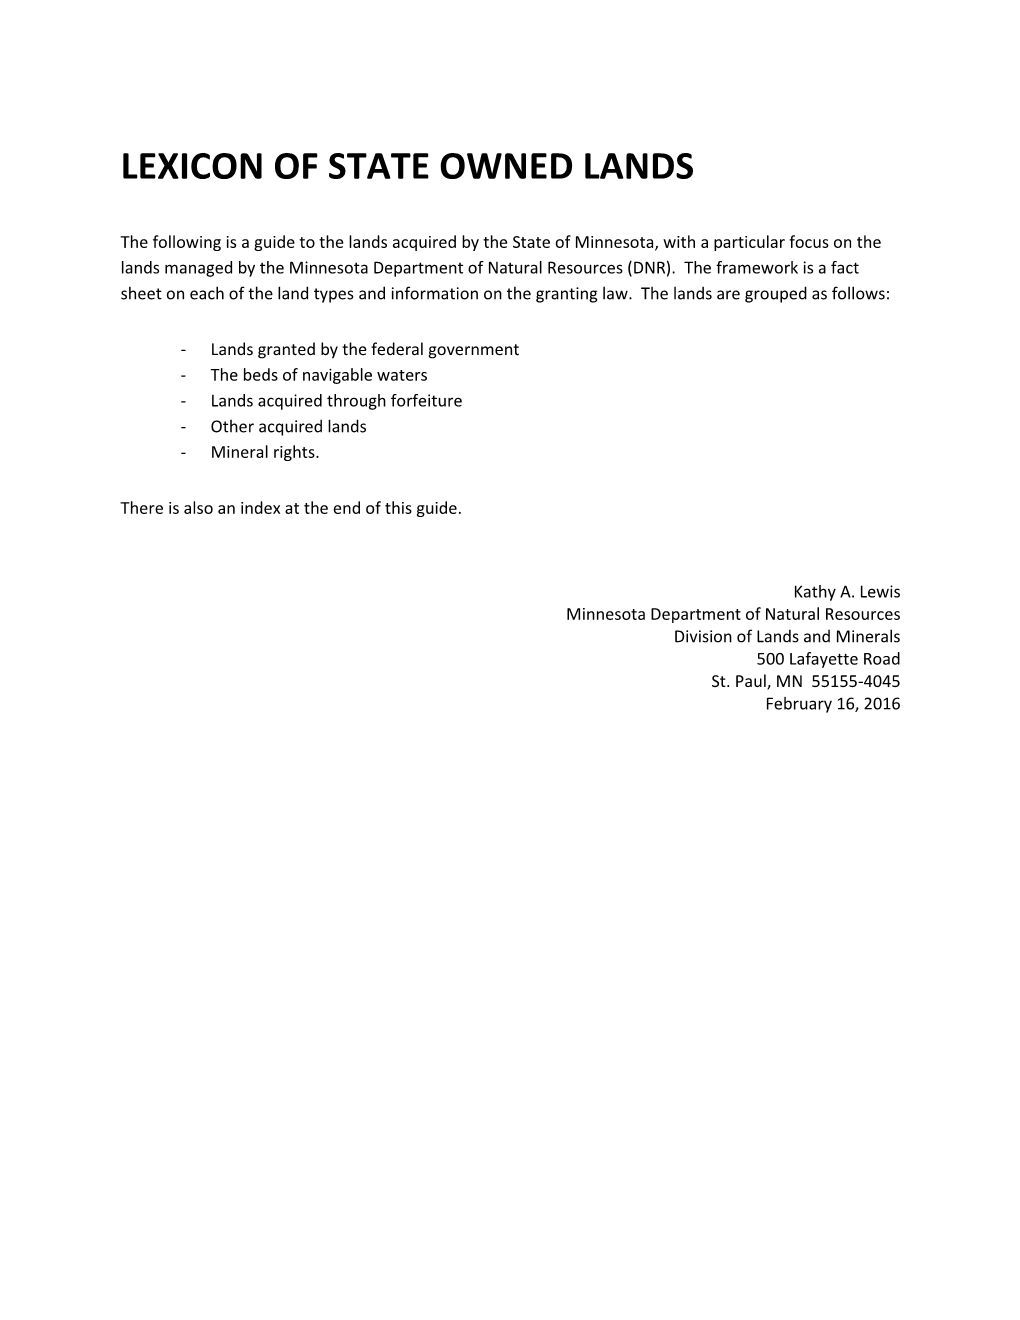 Lexicon of State Owned Lands Managed By